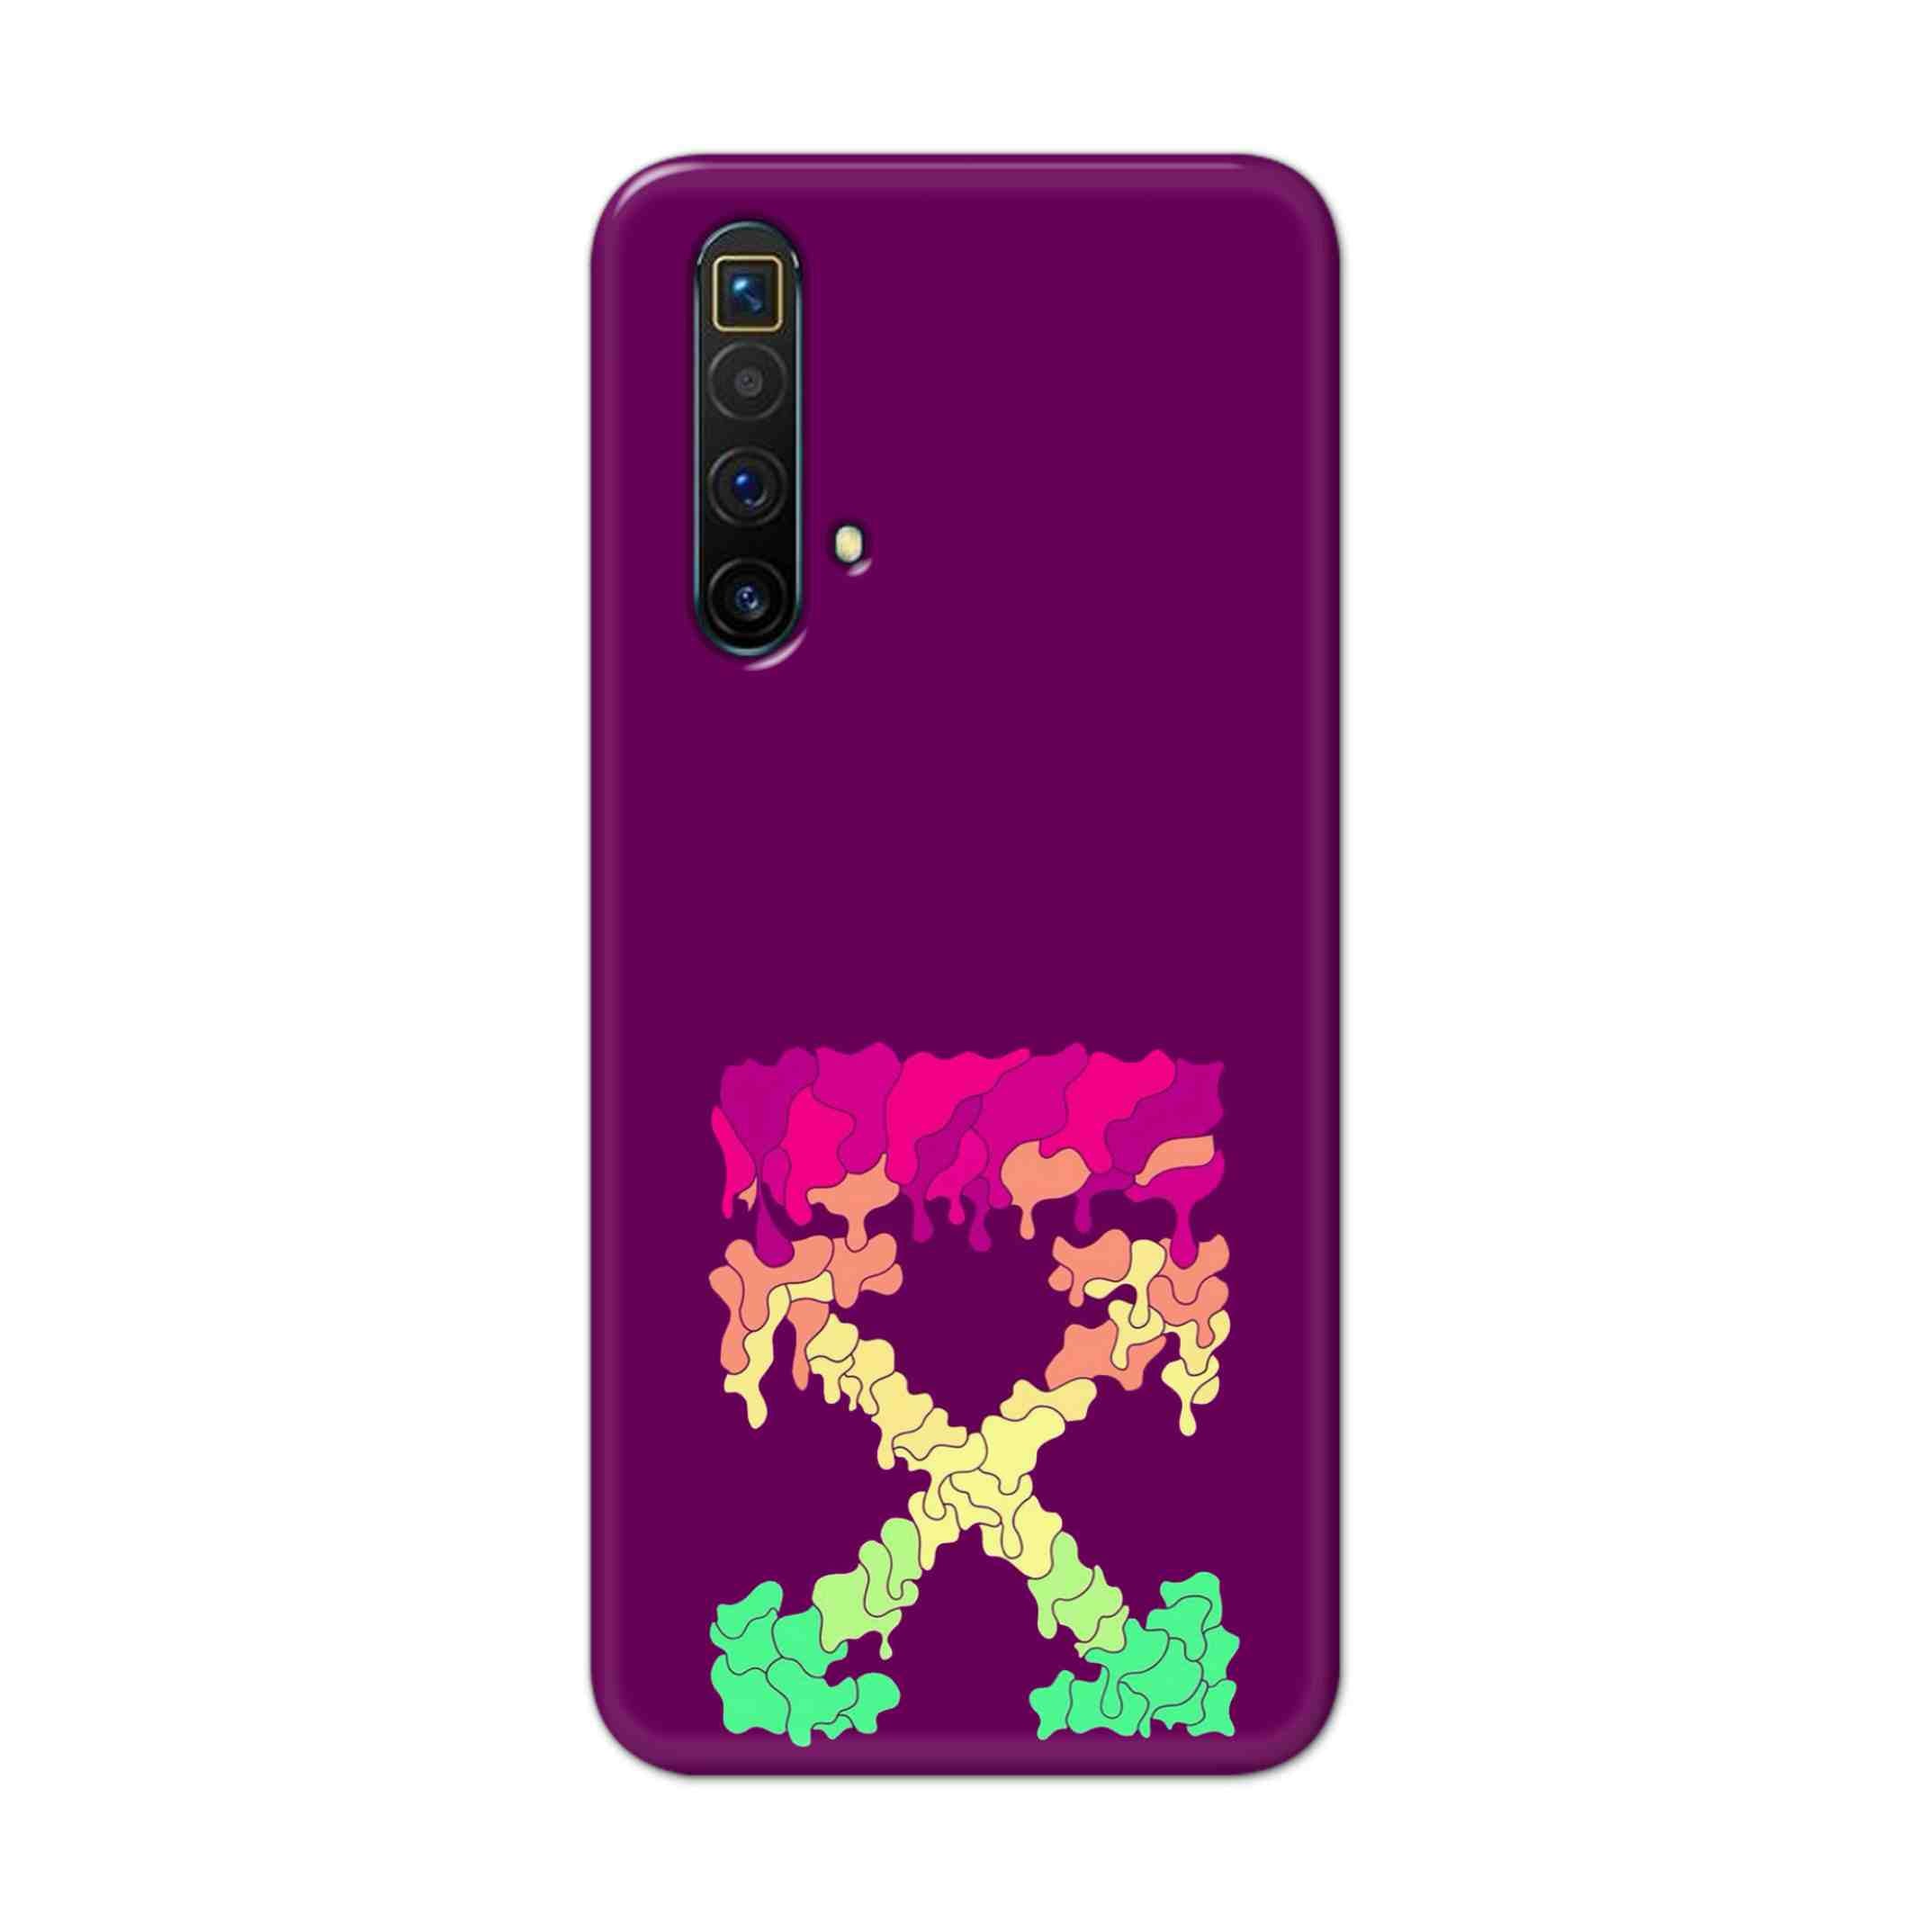 Buy X.O Hard Back Mobile Phone Case Cover For Oppo Realme X3 Online